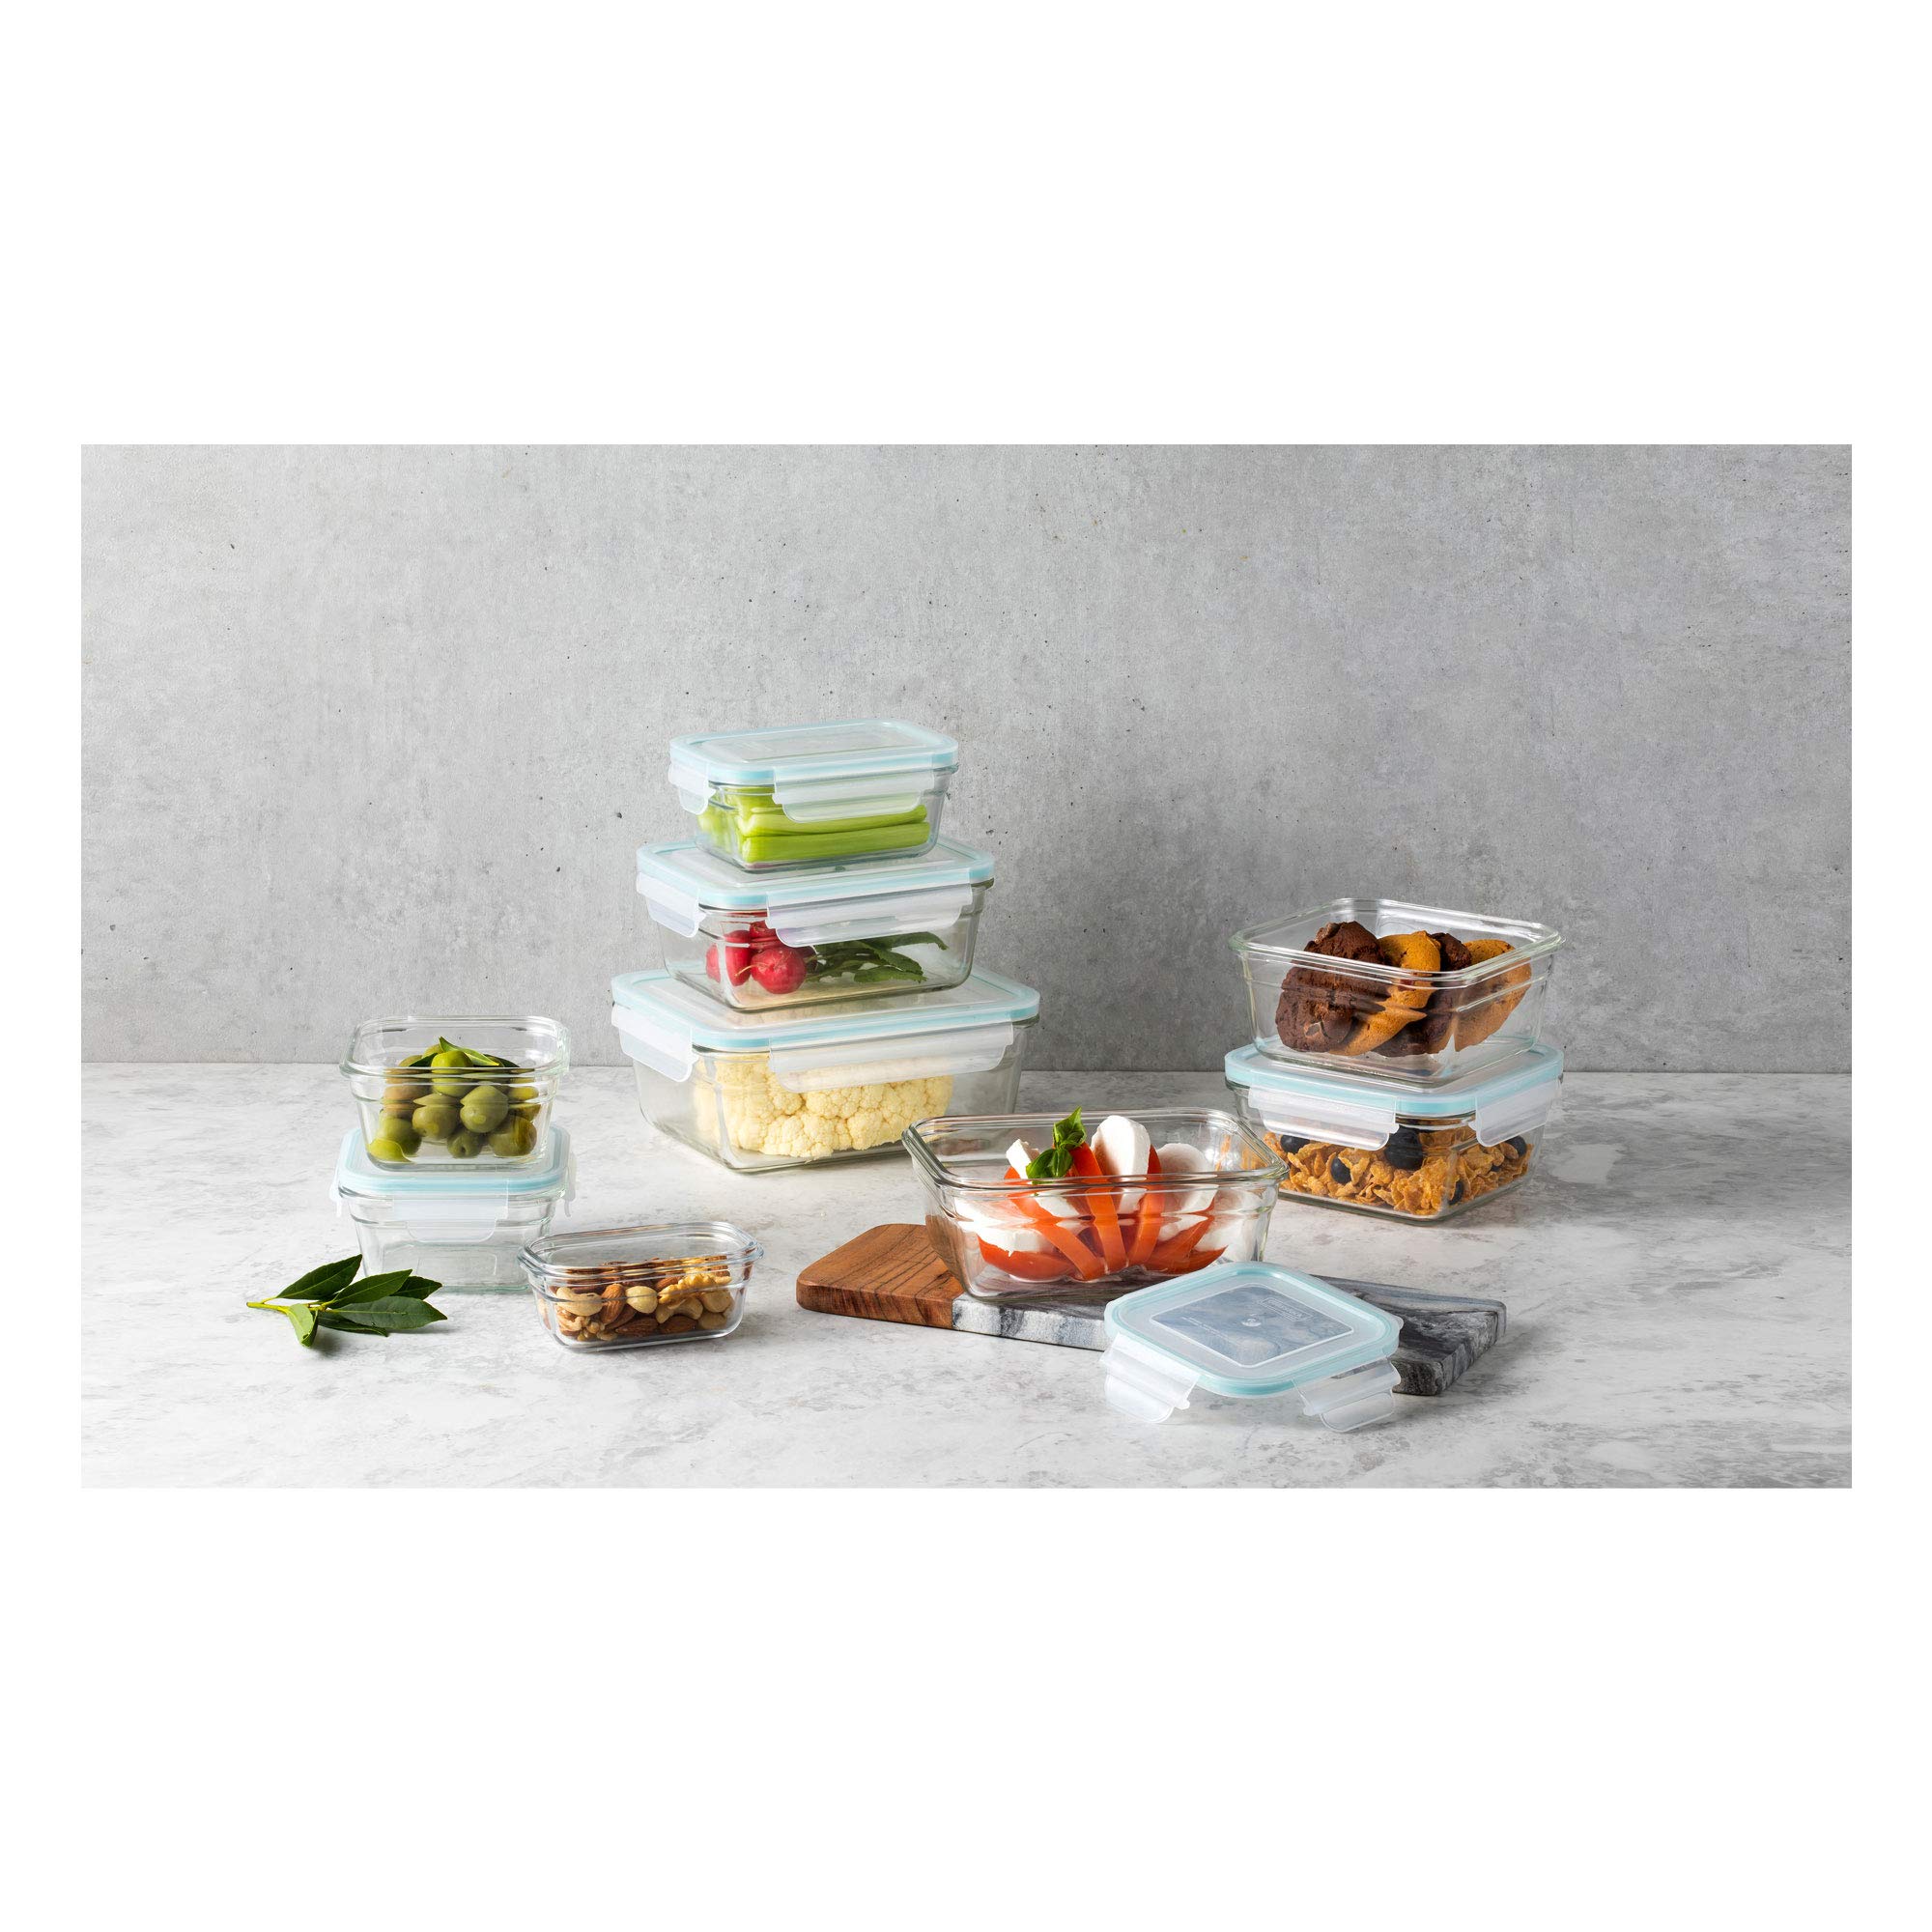 GLASSLOCK Oven and Microwave Safe Glass Food Storage Containers 18 Piece Set